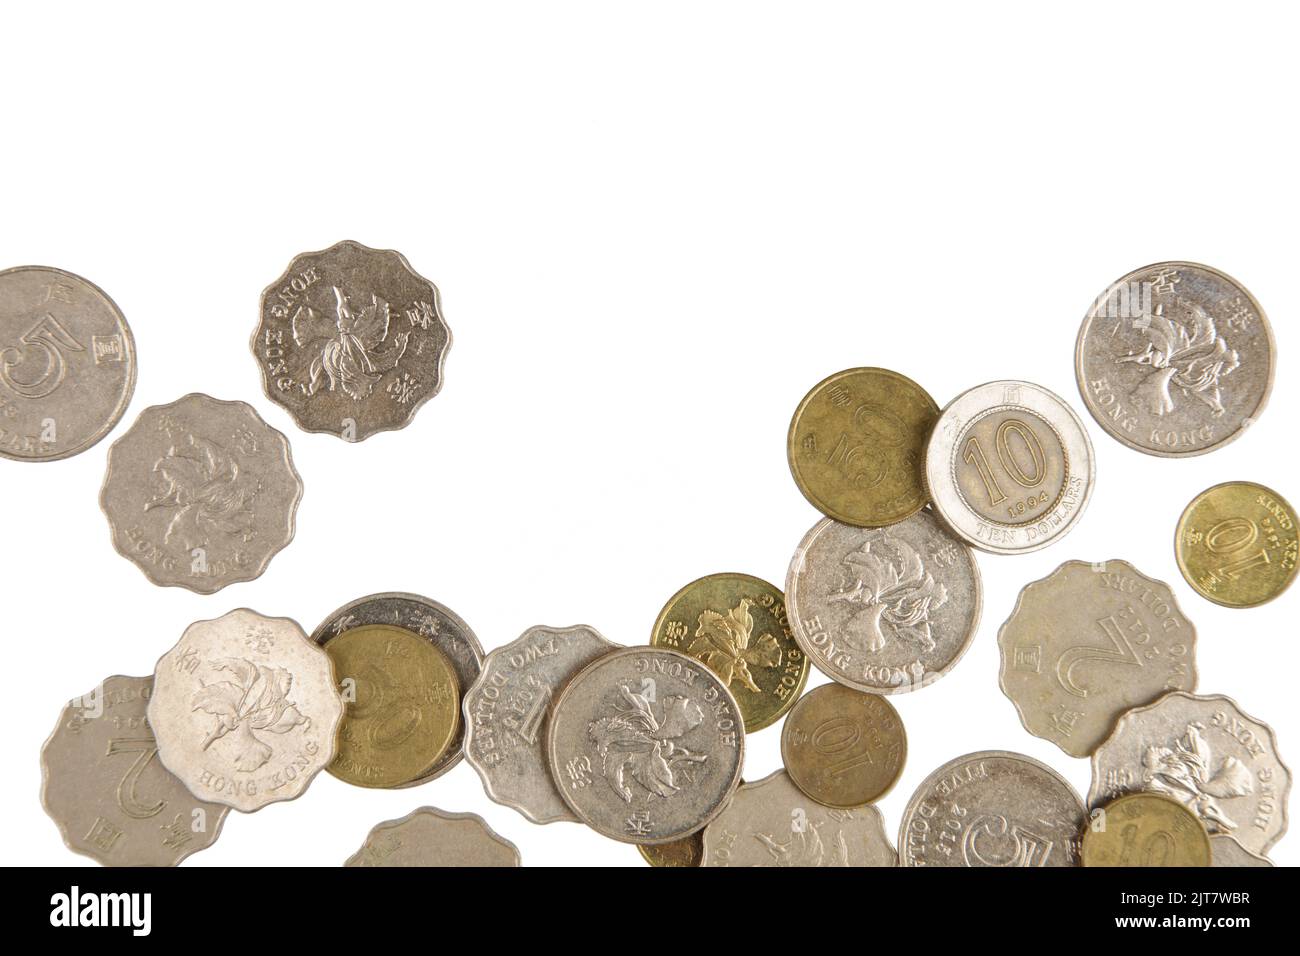 A Flat Lay background of British Coins isolated on a white background with copy space. Stock Photo